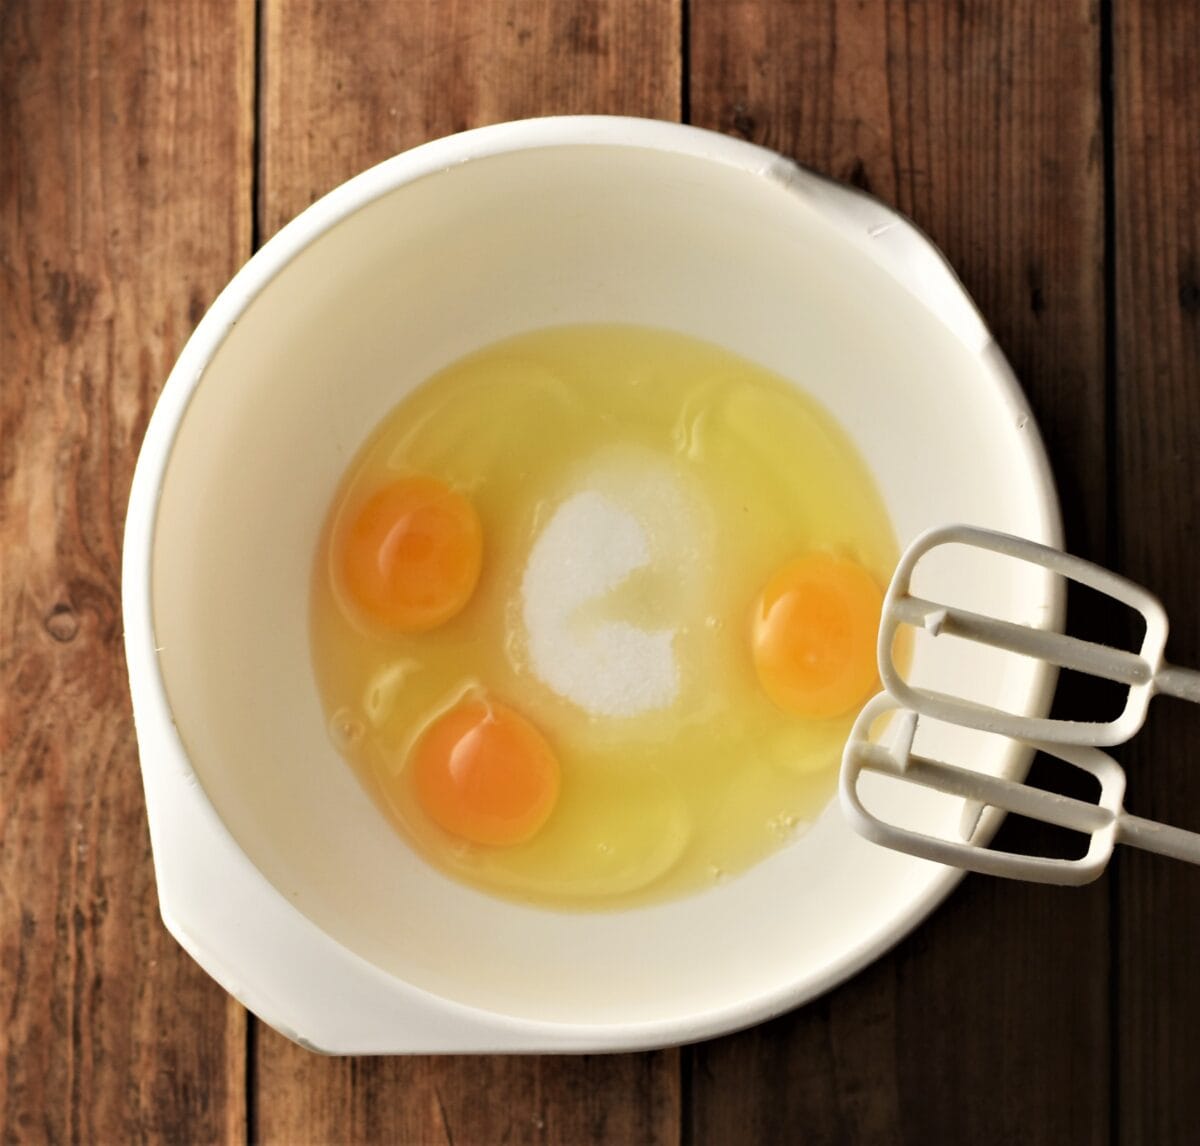 3 eggs and sugar in large white bowl with electric mixer end pieces.